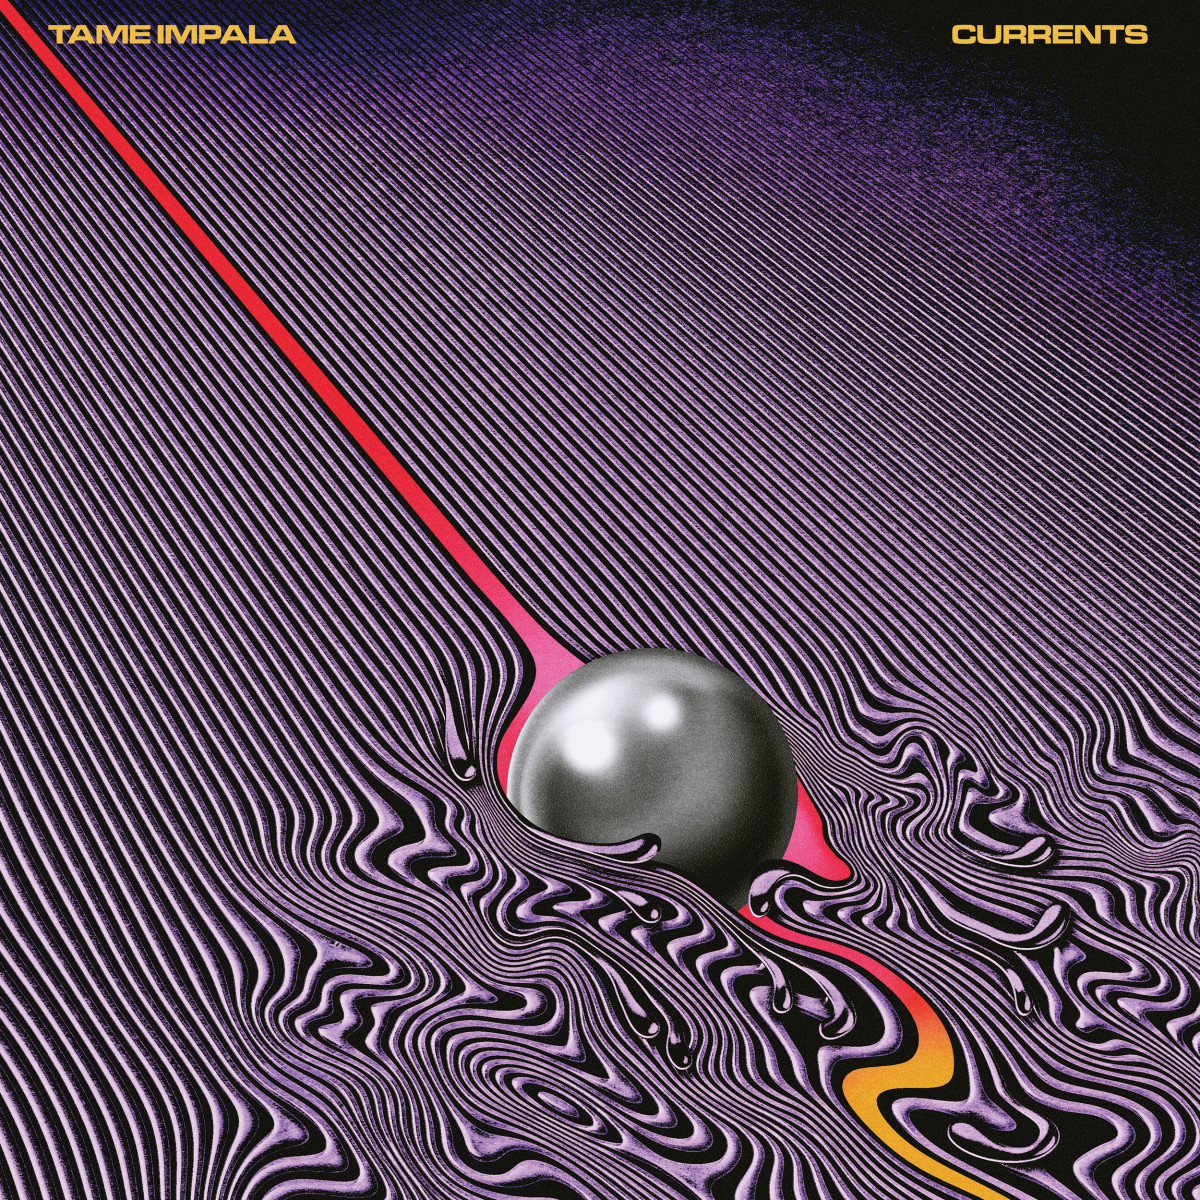 Robert Beatty / Music / Tame Impala: Currents&lt;span class=&quot;slide_numbers&quot;&gt;&lt;span class=&quot;slide_number&quot;&gt;1&lt;/span&gt;/5&lt;/span&gt;